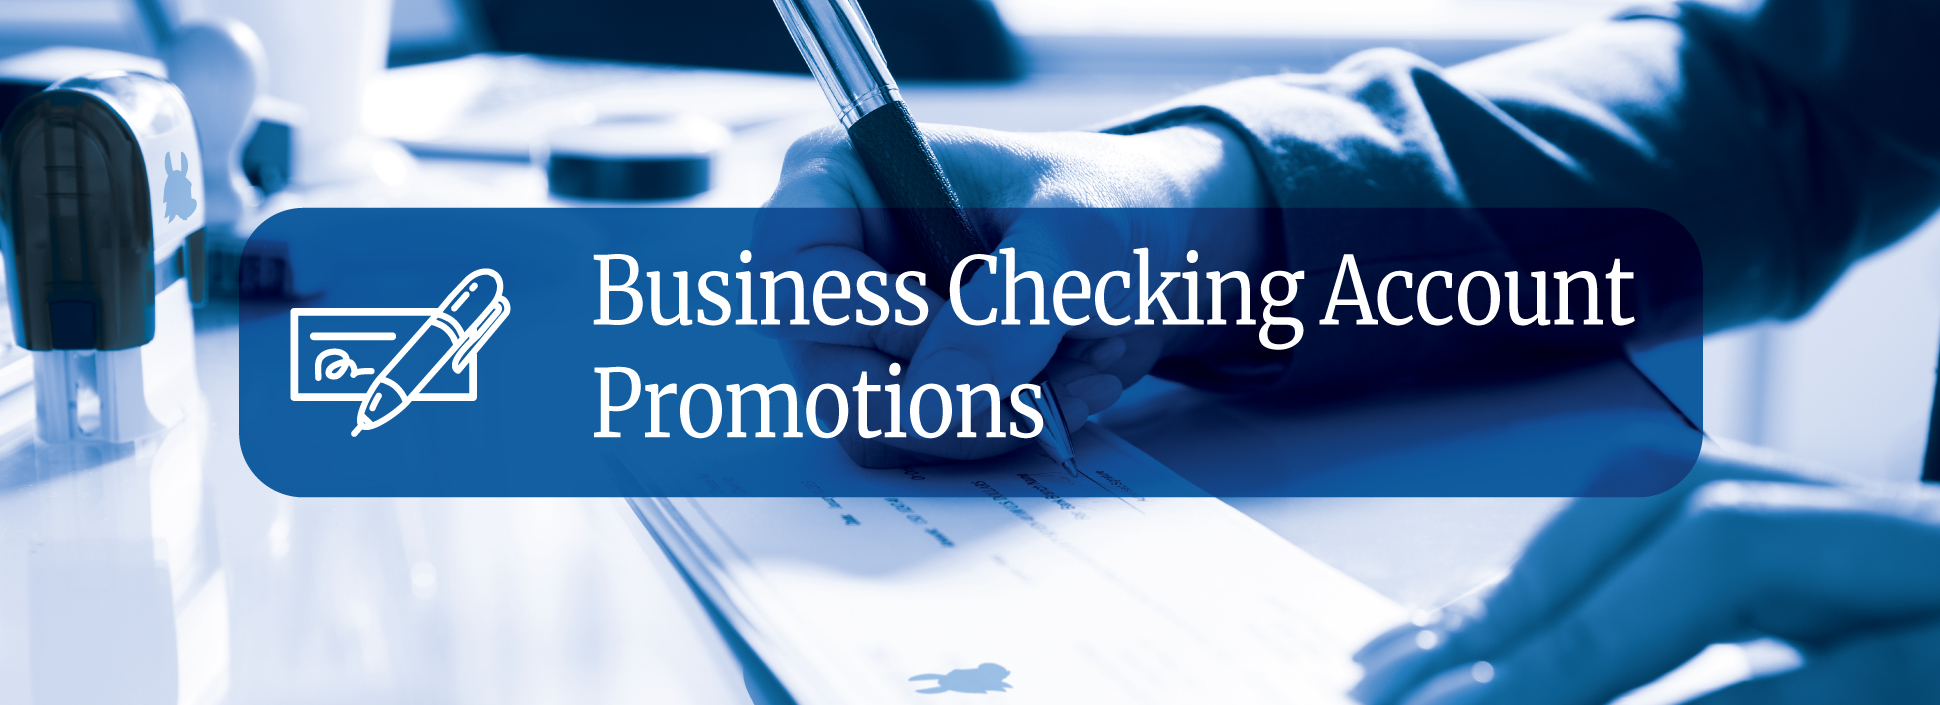 Best Business Checking Account Promotions April 2021